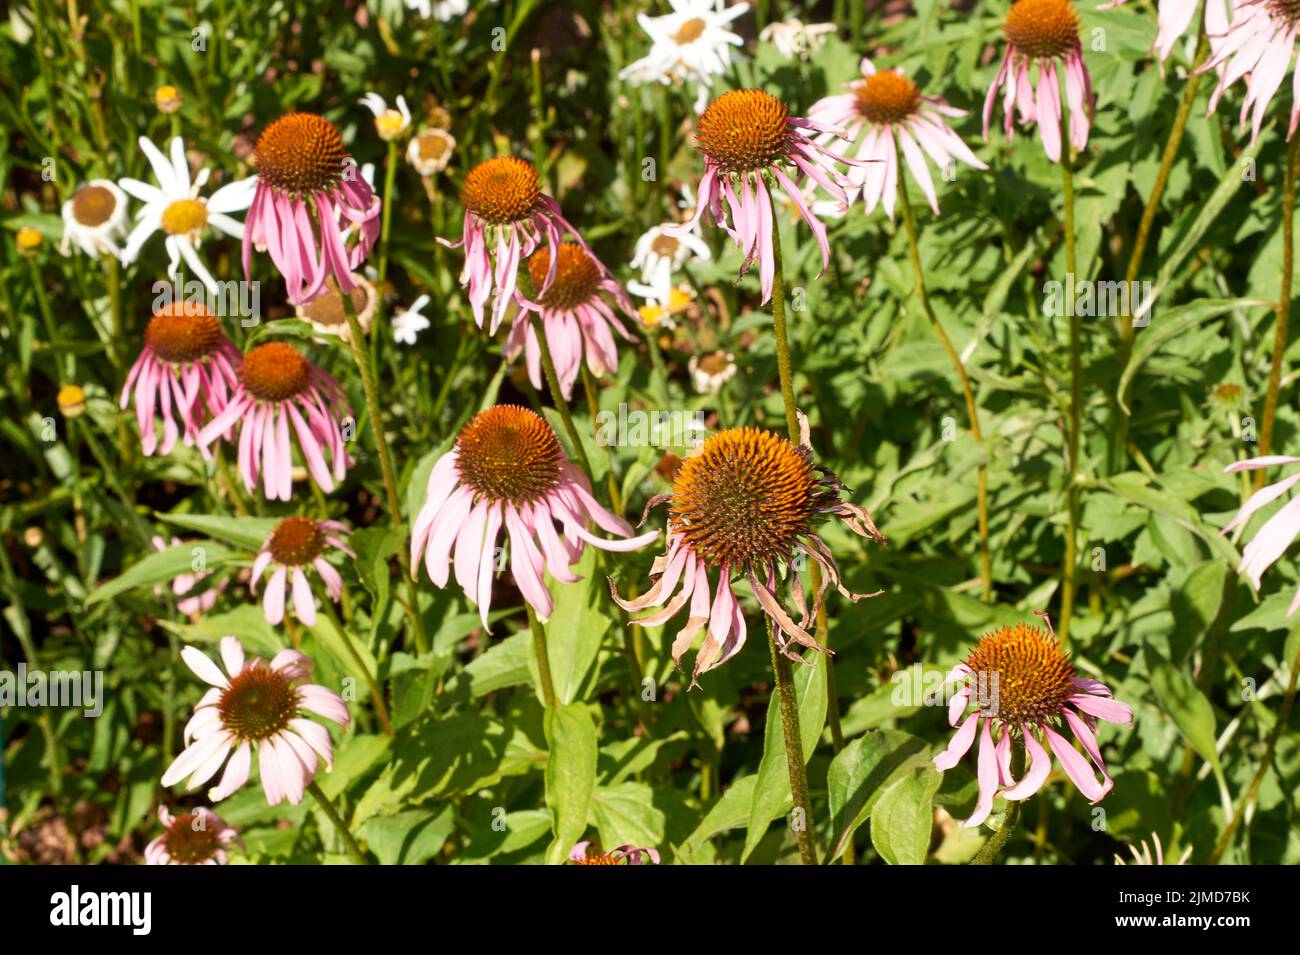 Blooming medicinal herb echinacea purpurea or coneflower, close-up, selective focus in the center of flower Stock Photo